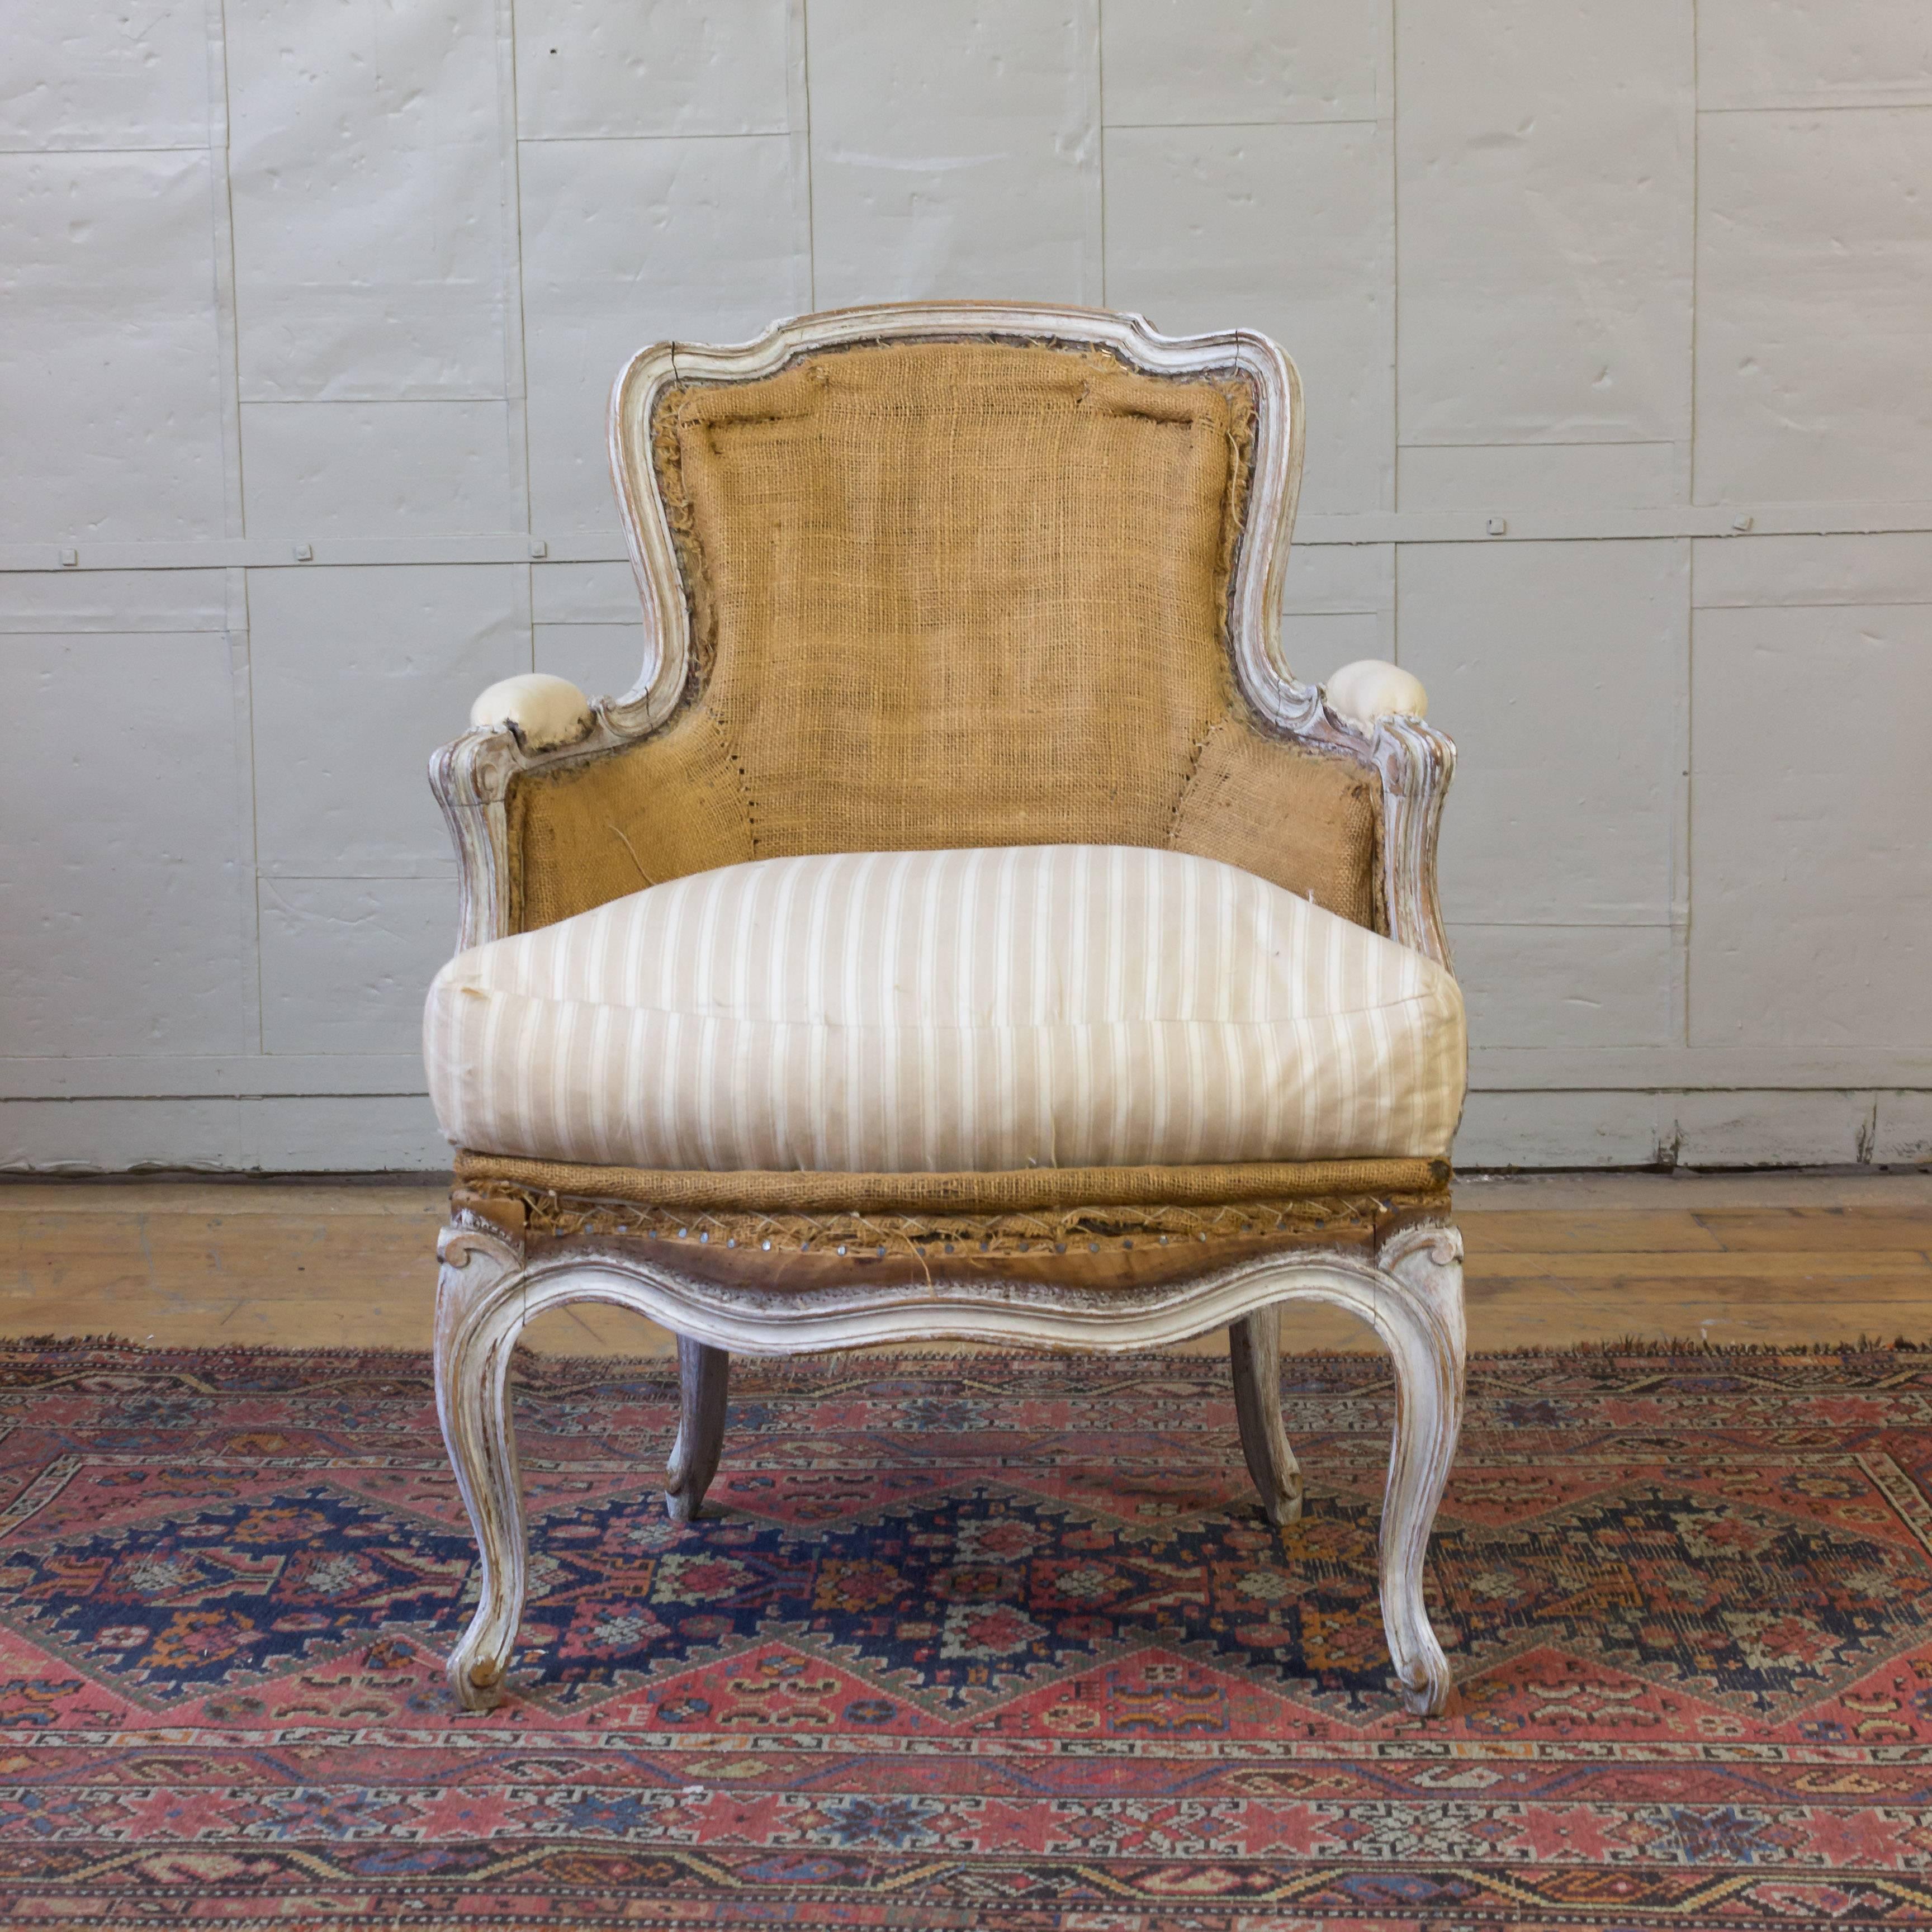 A pair of Louis XV style armchairs with painted wood trim in burlap with down cushions.